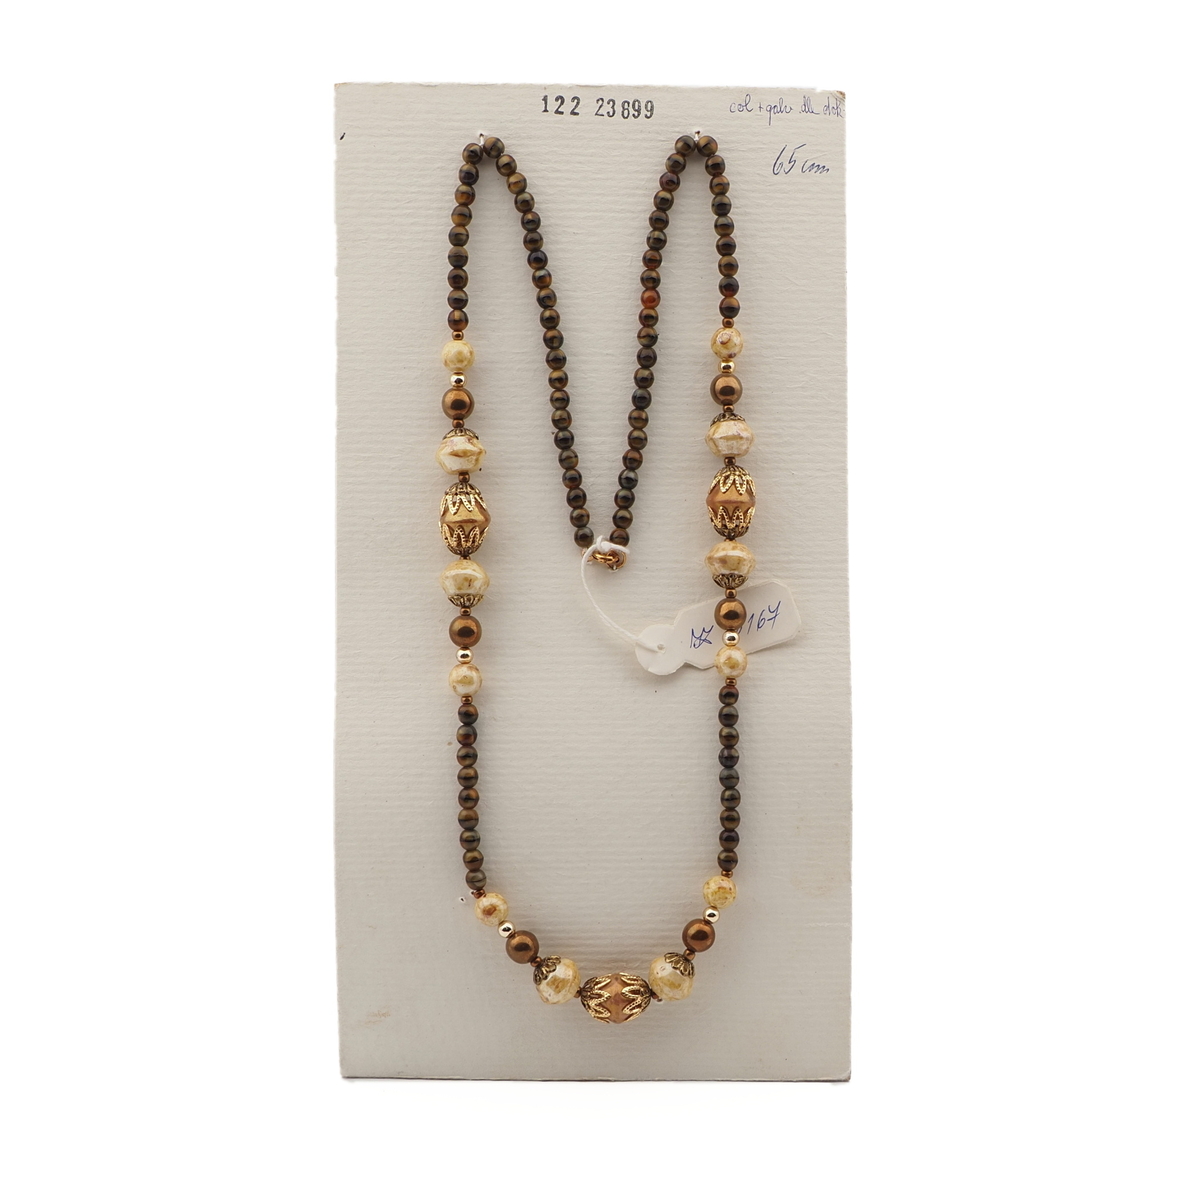 Vintage Czech necklace beige brown marble bronze glass beads 25"